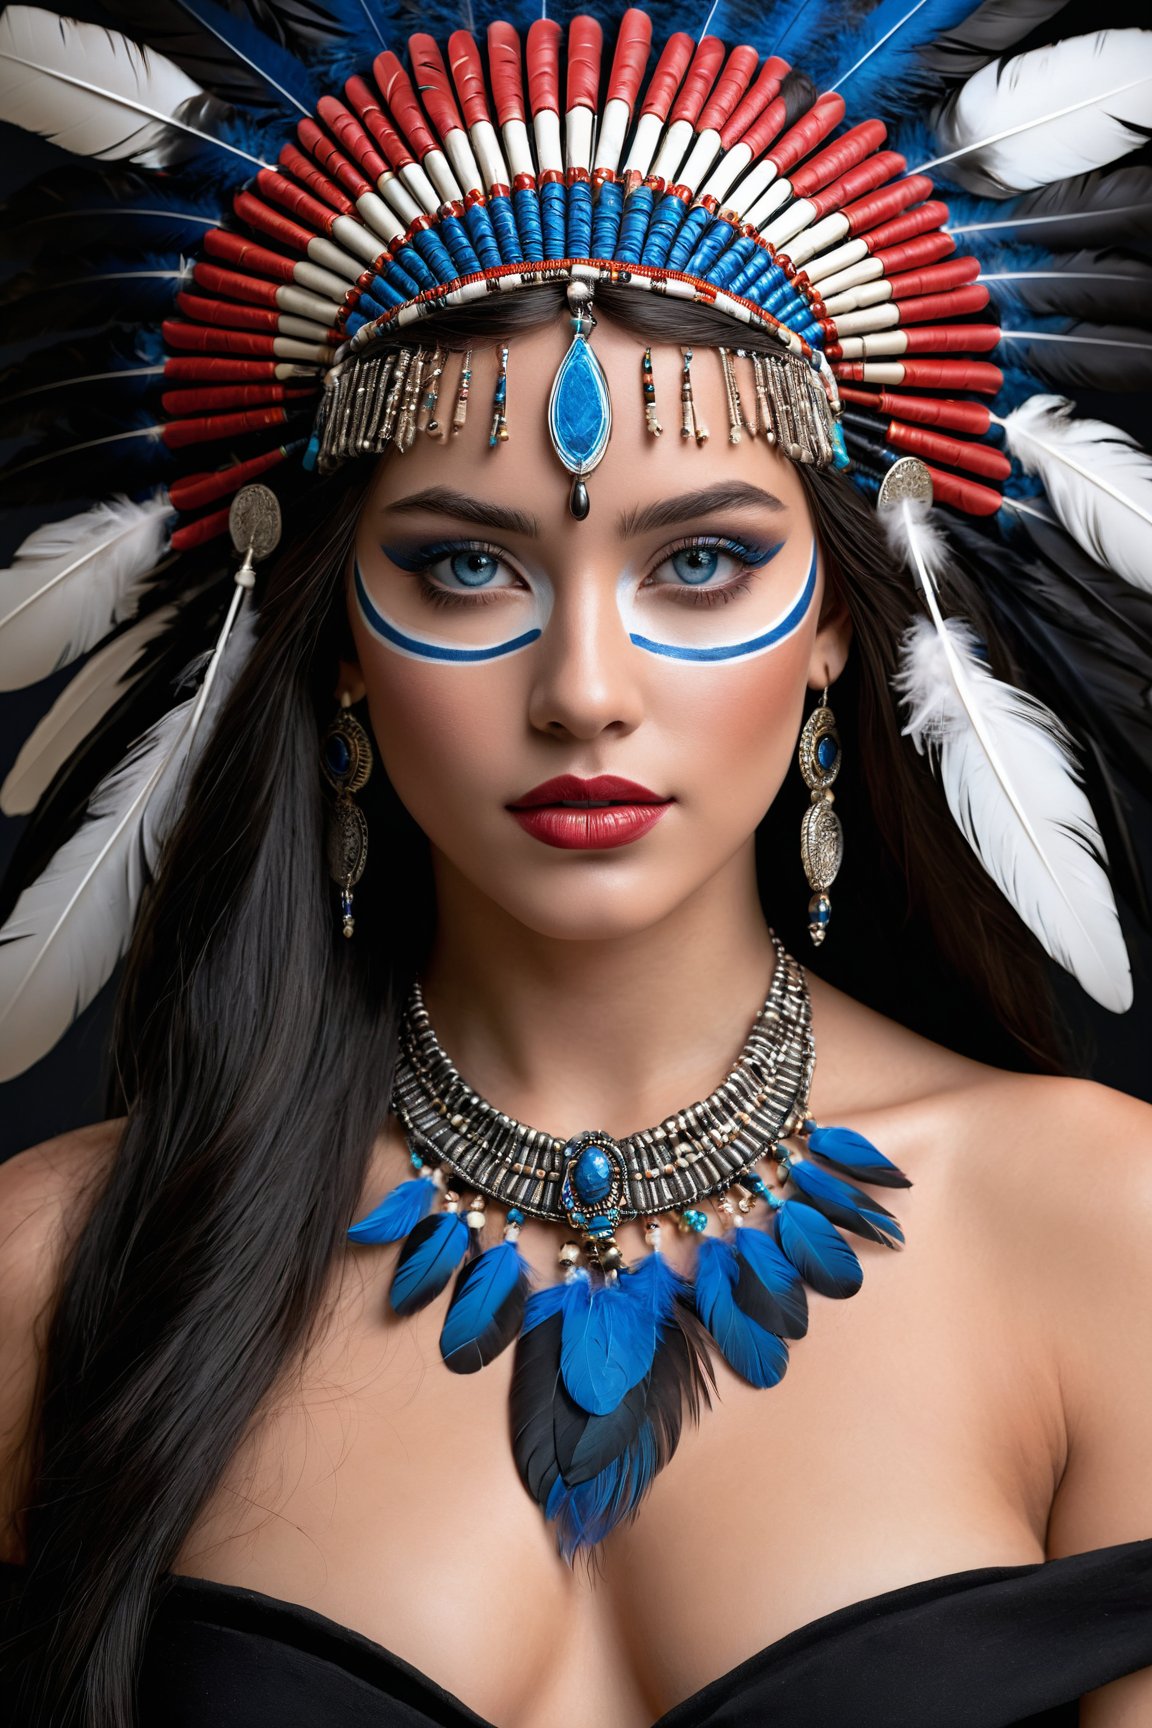 (best quality,8K,highres,masterpiece), ultra-detailed, (realistic portrait) of a girl, solo, showcasing long, flowing black hair and captivating blue eyes that hold the viewer's gaze. This portrait emphasizes her striking features enhanced by meticulous makeup, including vivid lipstick that accentuates her lips. She wears exquisite jewelry, a necklace that complements her attire, and is adorned with a unique headdress featuring feathers, adding a majestic and ethereal quality to her appearance. The inclusion of a mask and face paint draws inspiration from Native American traditions, enriching the portrait with cultural depth and significance. The overall composition is a celebration of beauty, tradition, and the artistry of makeup and adornment, rendered with lifelike precision and attention to detail.